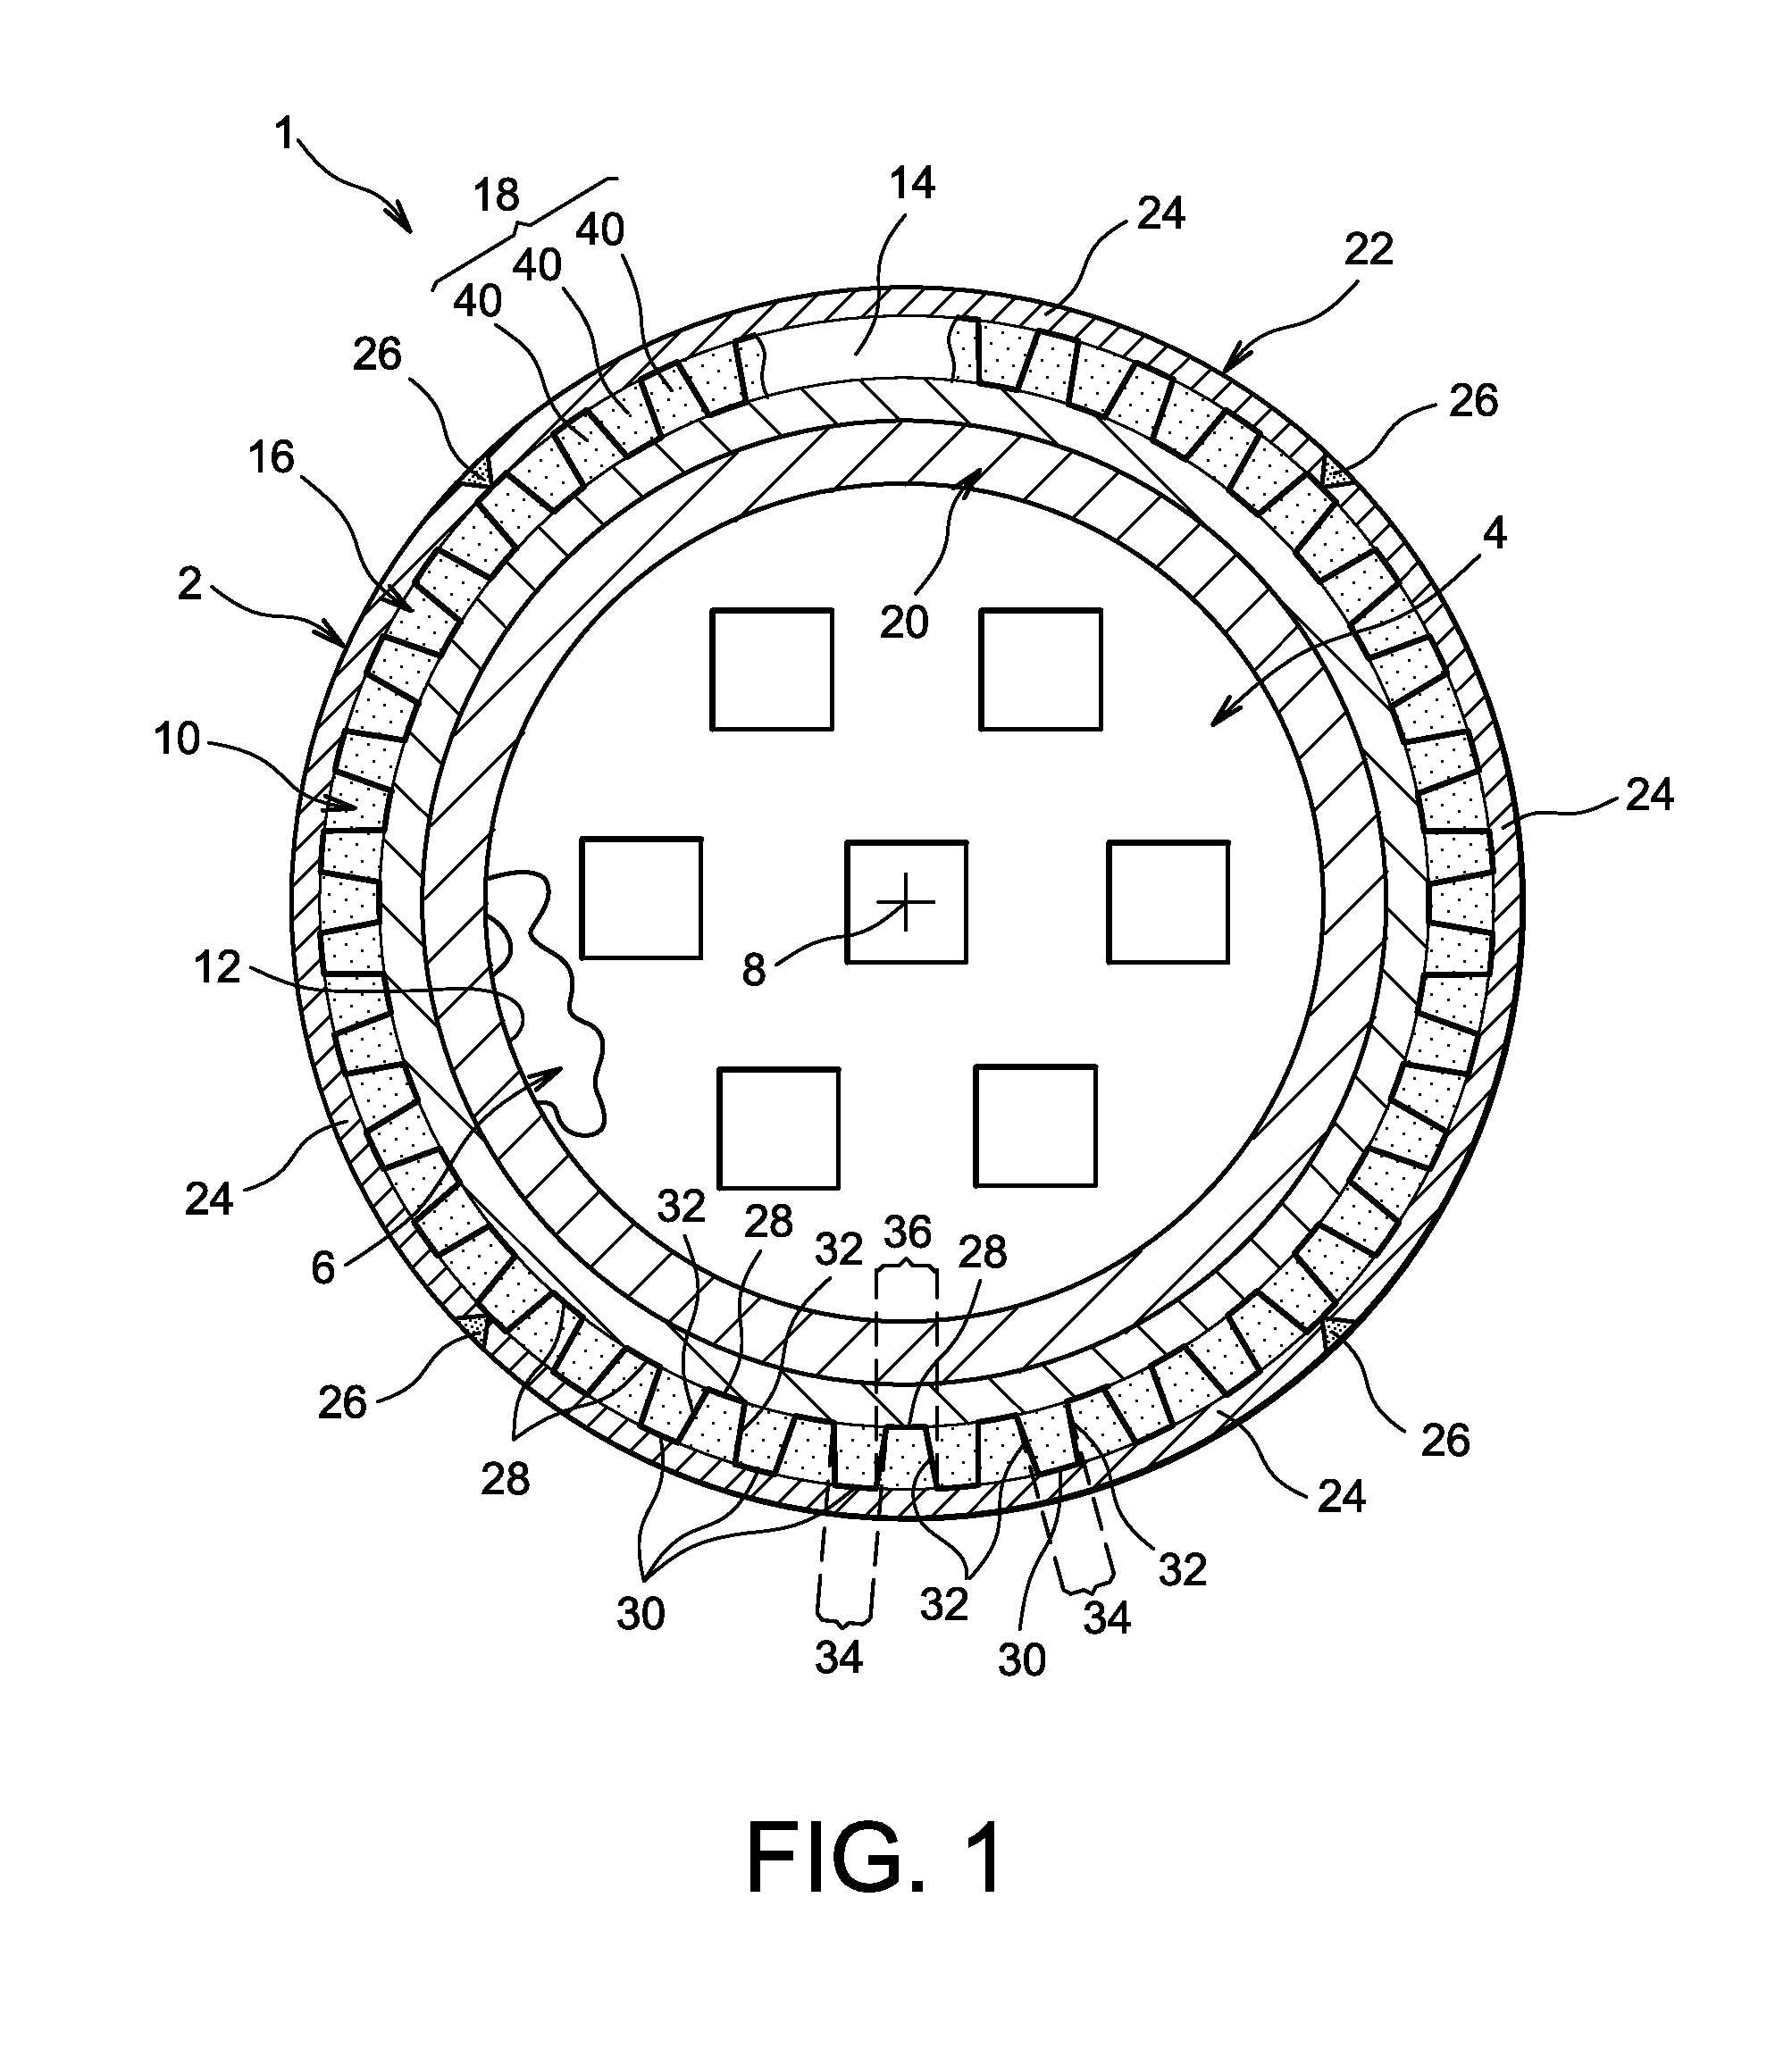 Method for manufacture of a package for the transport and/or storage of nuclear material, using the phenomenon of welding shrinkage